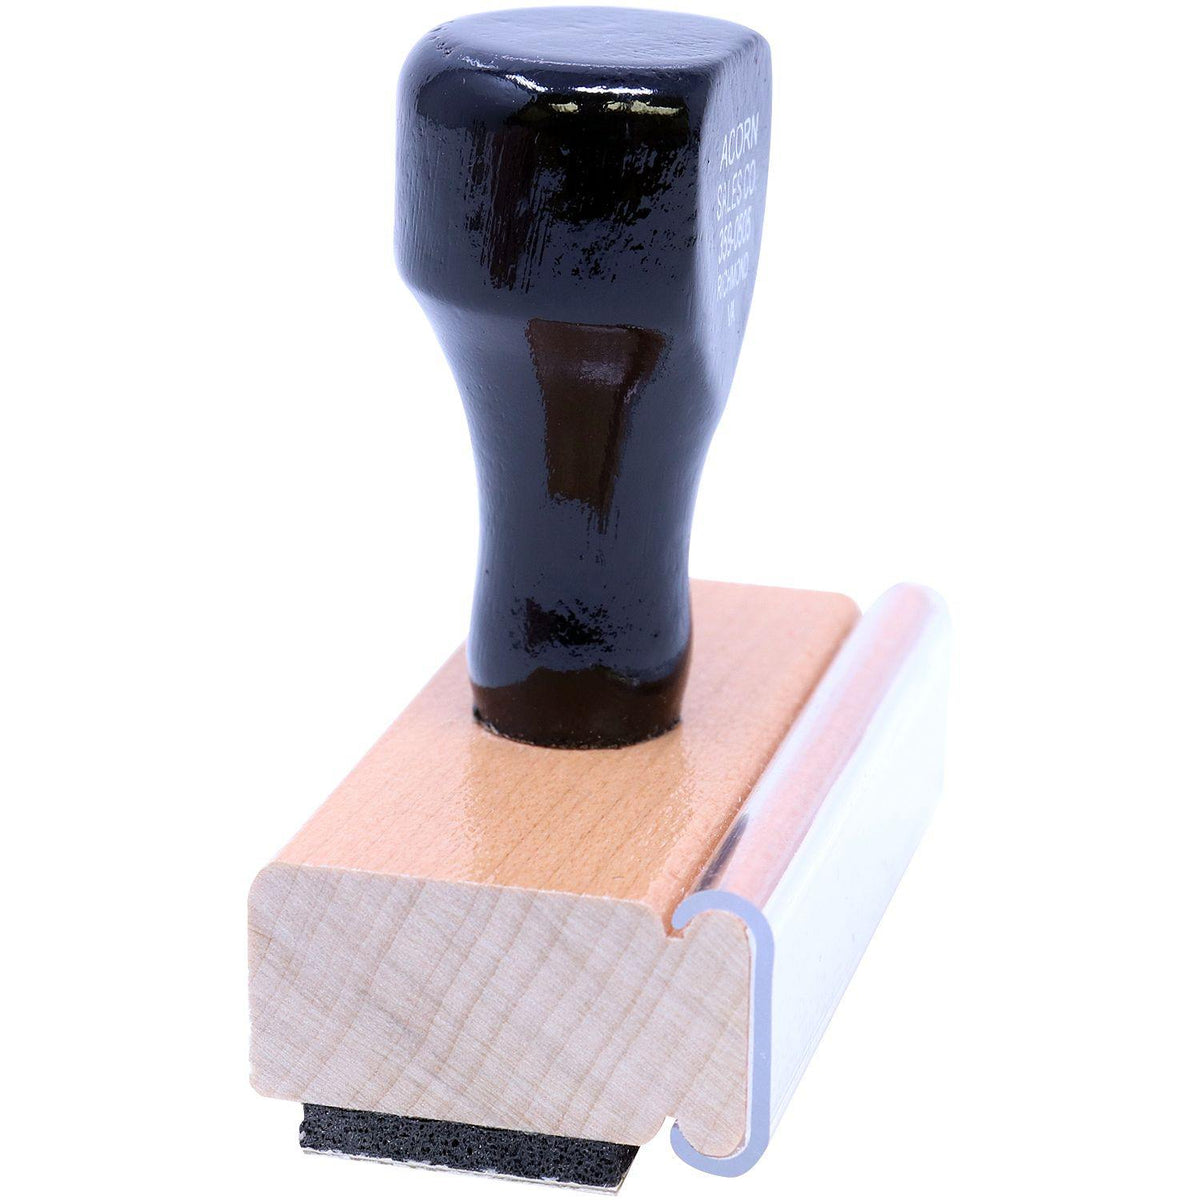 Side View of Correo Aero Rubber Stamp at an Angle